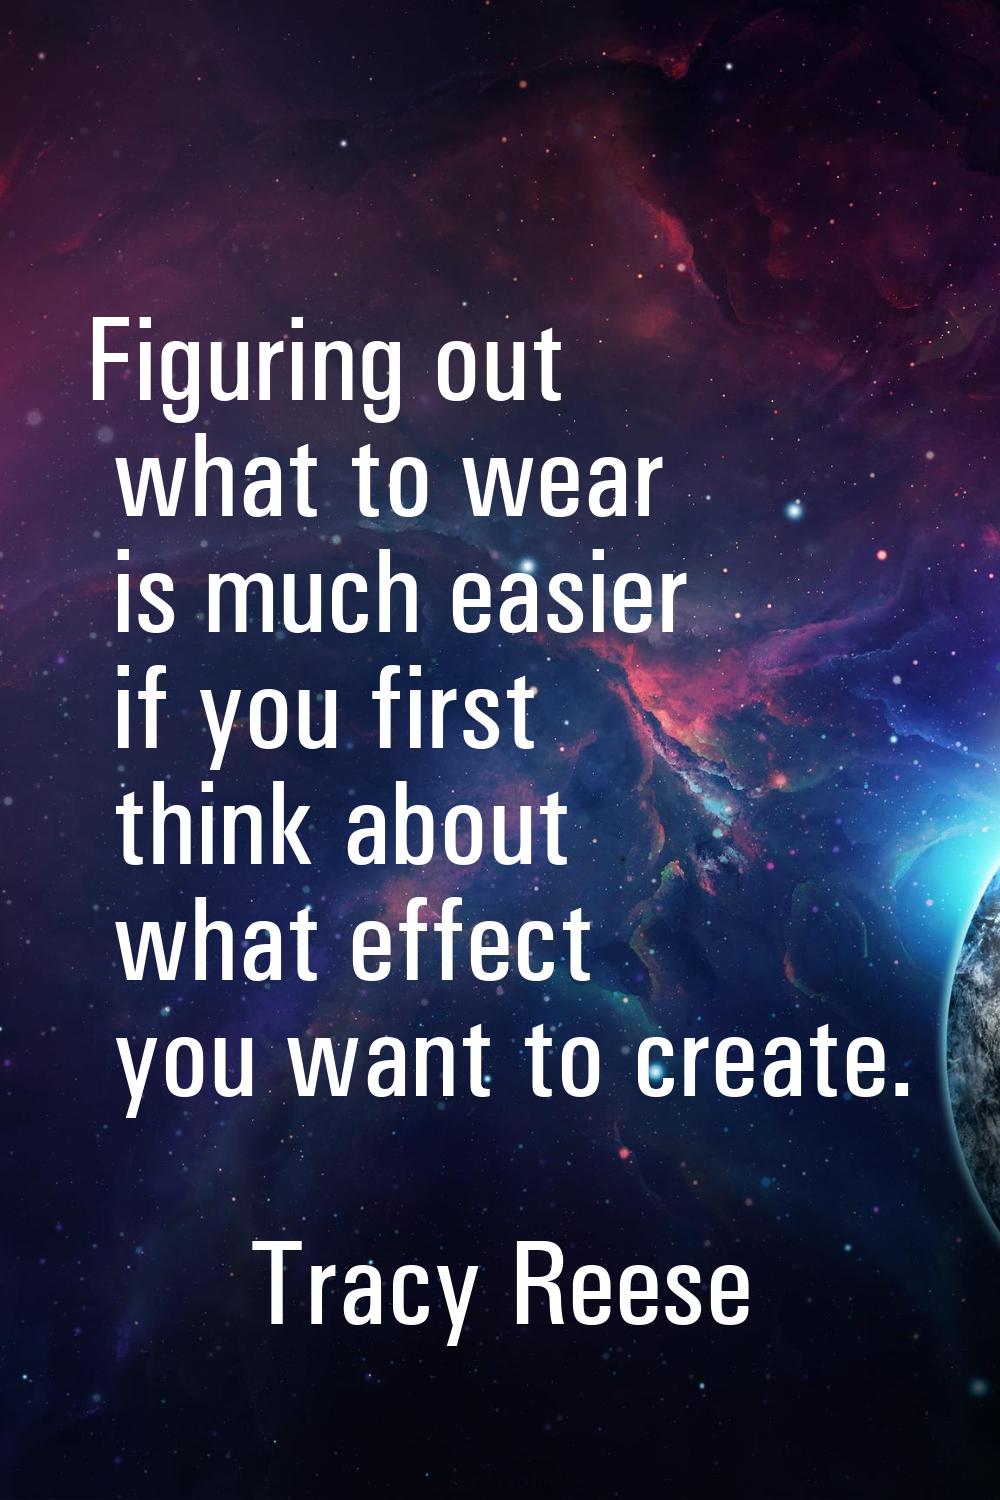 Figuring out what to wear is much easier if you first think about what effect you want to create.